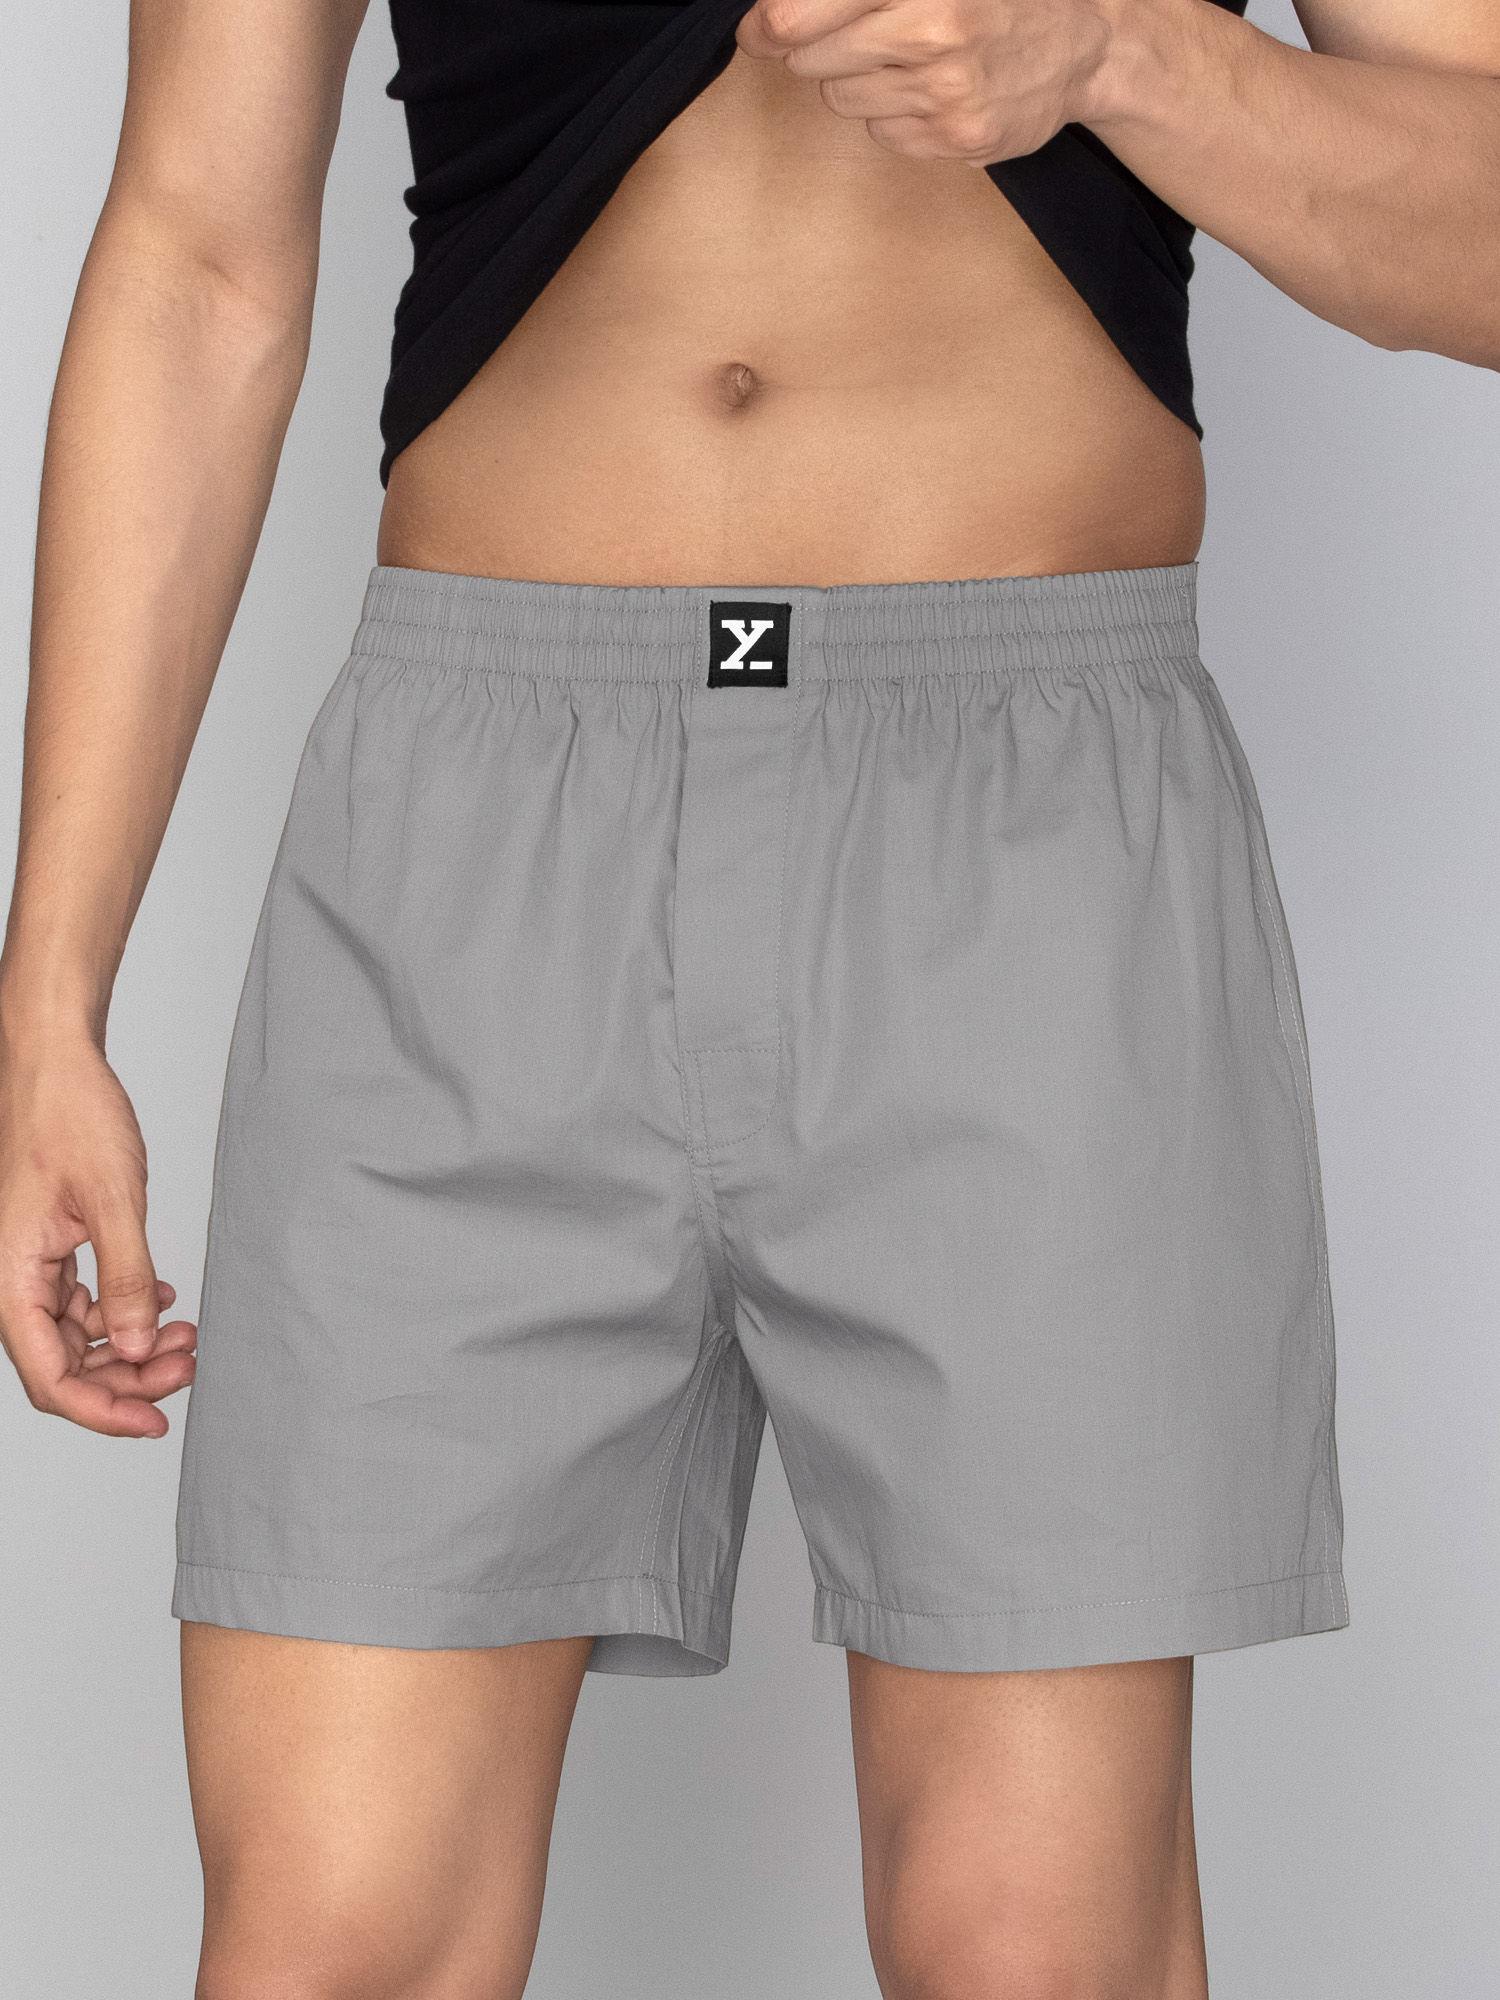 grey-pace-super-combed-cotton-inner-boxers-for-mens